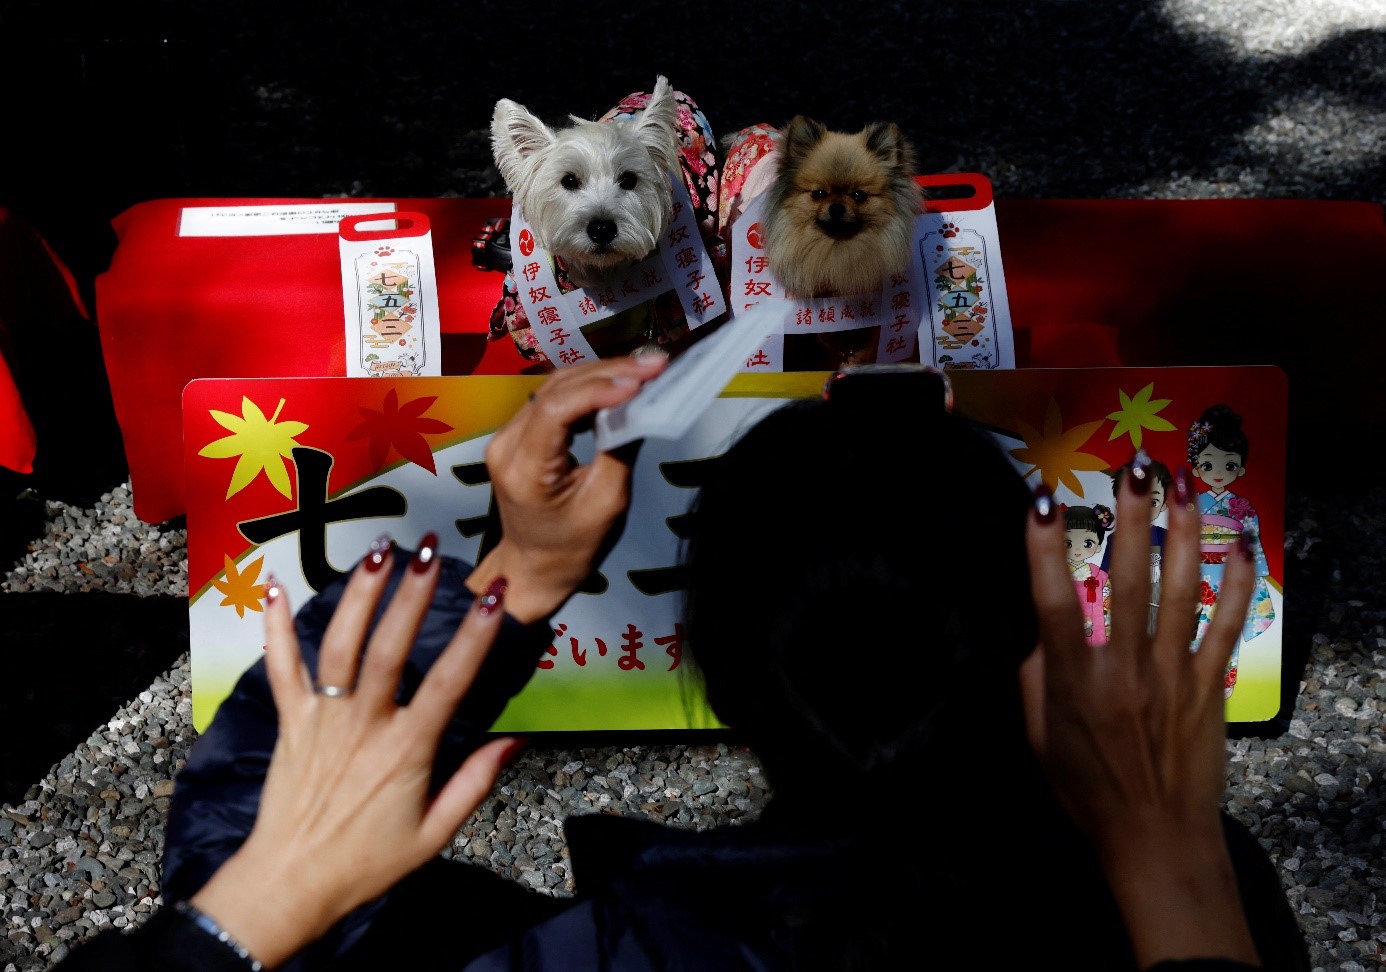 Pet dogs attend a Shichi-Go-San blessing in Zama